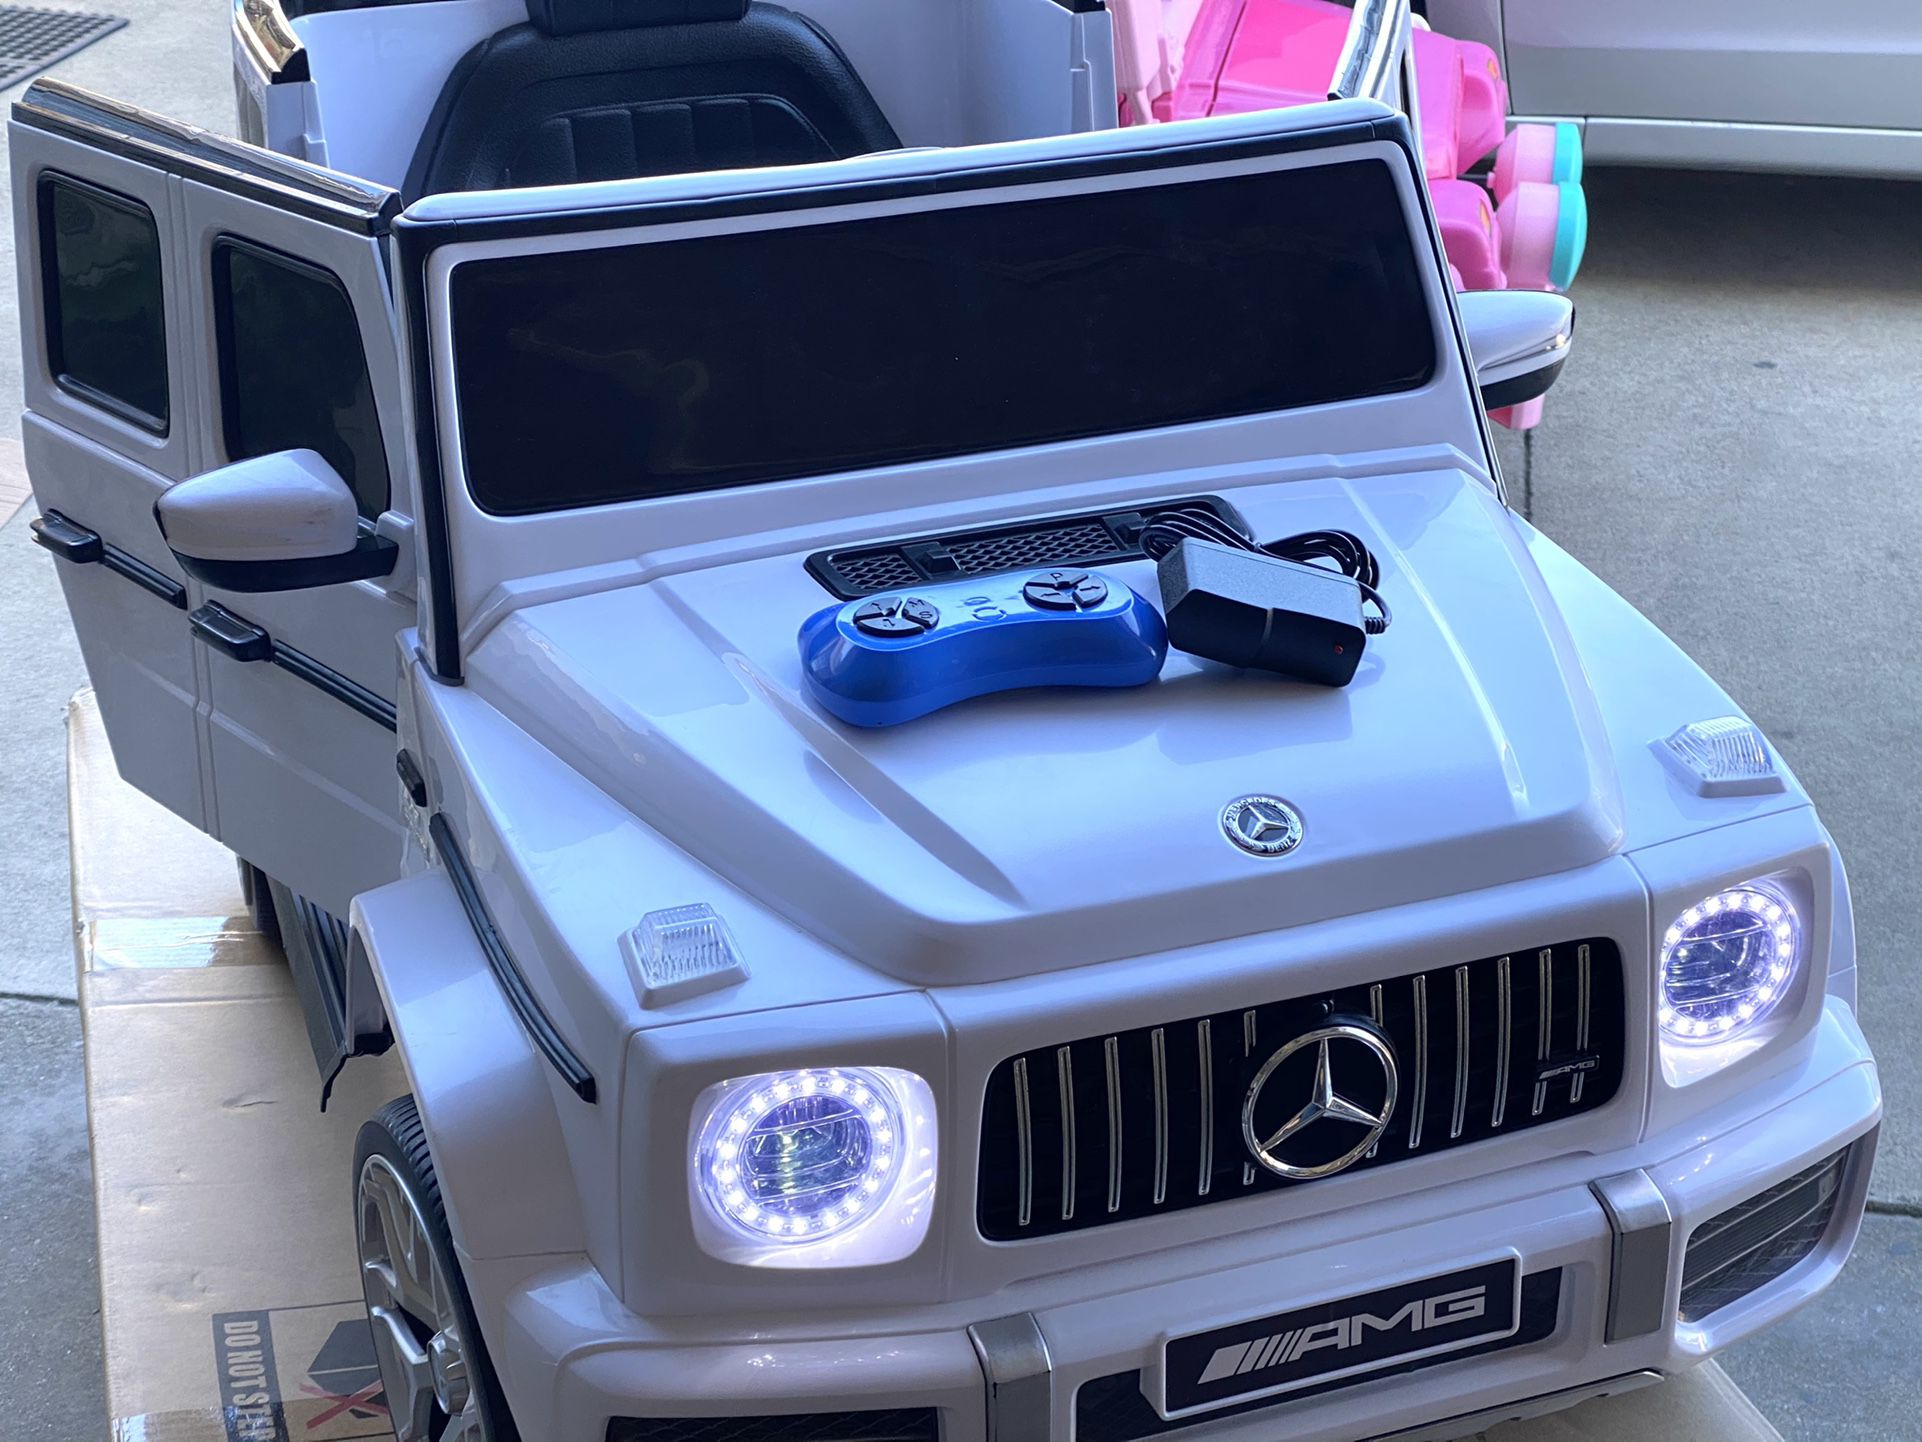 NEW CONDITION Mercedes Benz AMG G-Wagon 12volt REMOTE CONTROL MODEL electric Kid Ride On Car Power Wheels